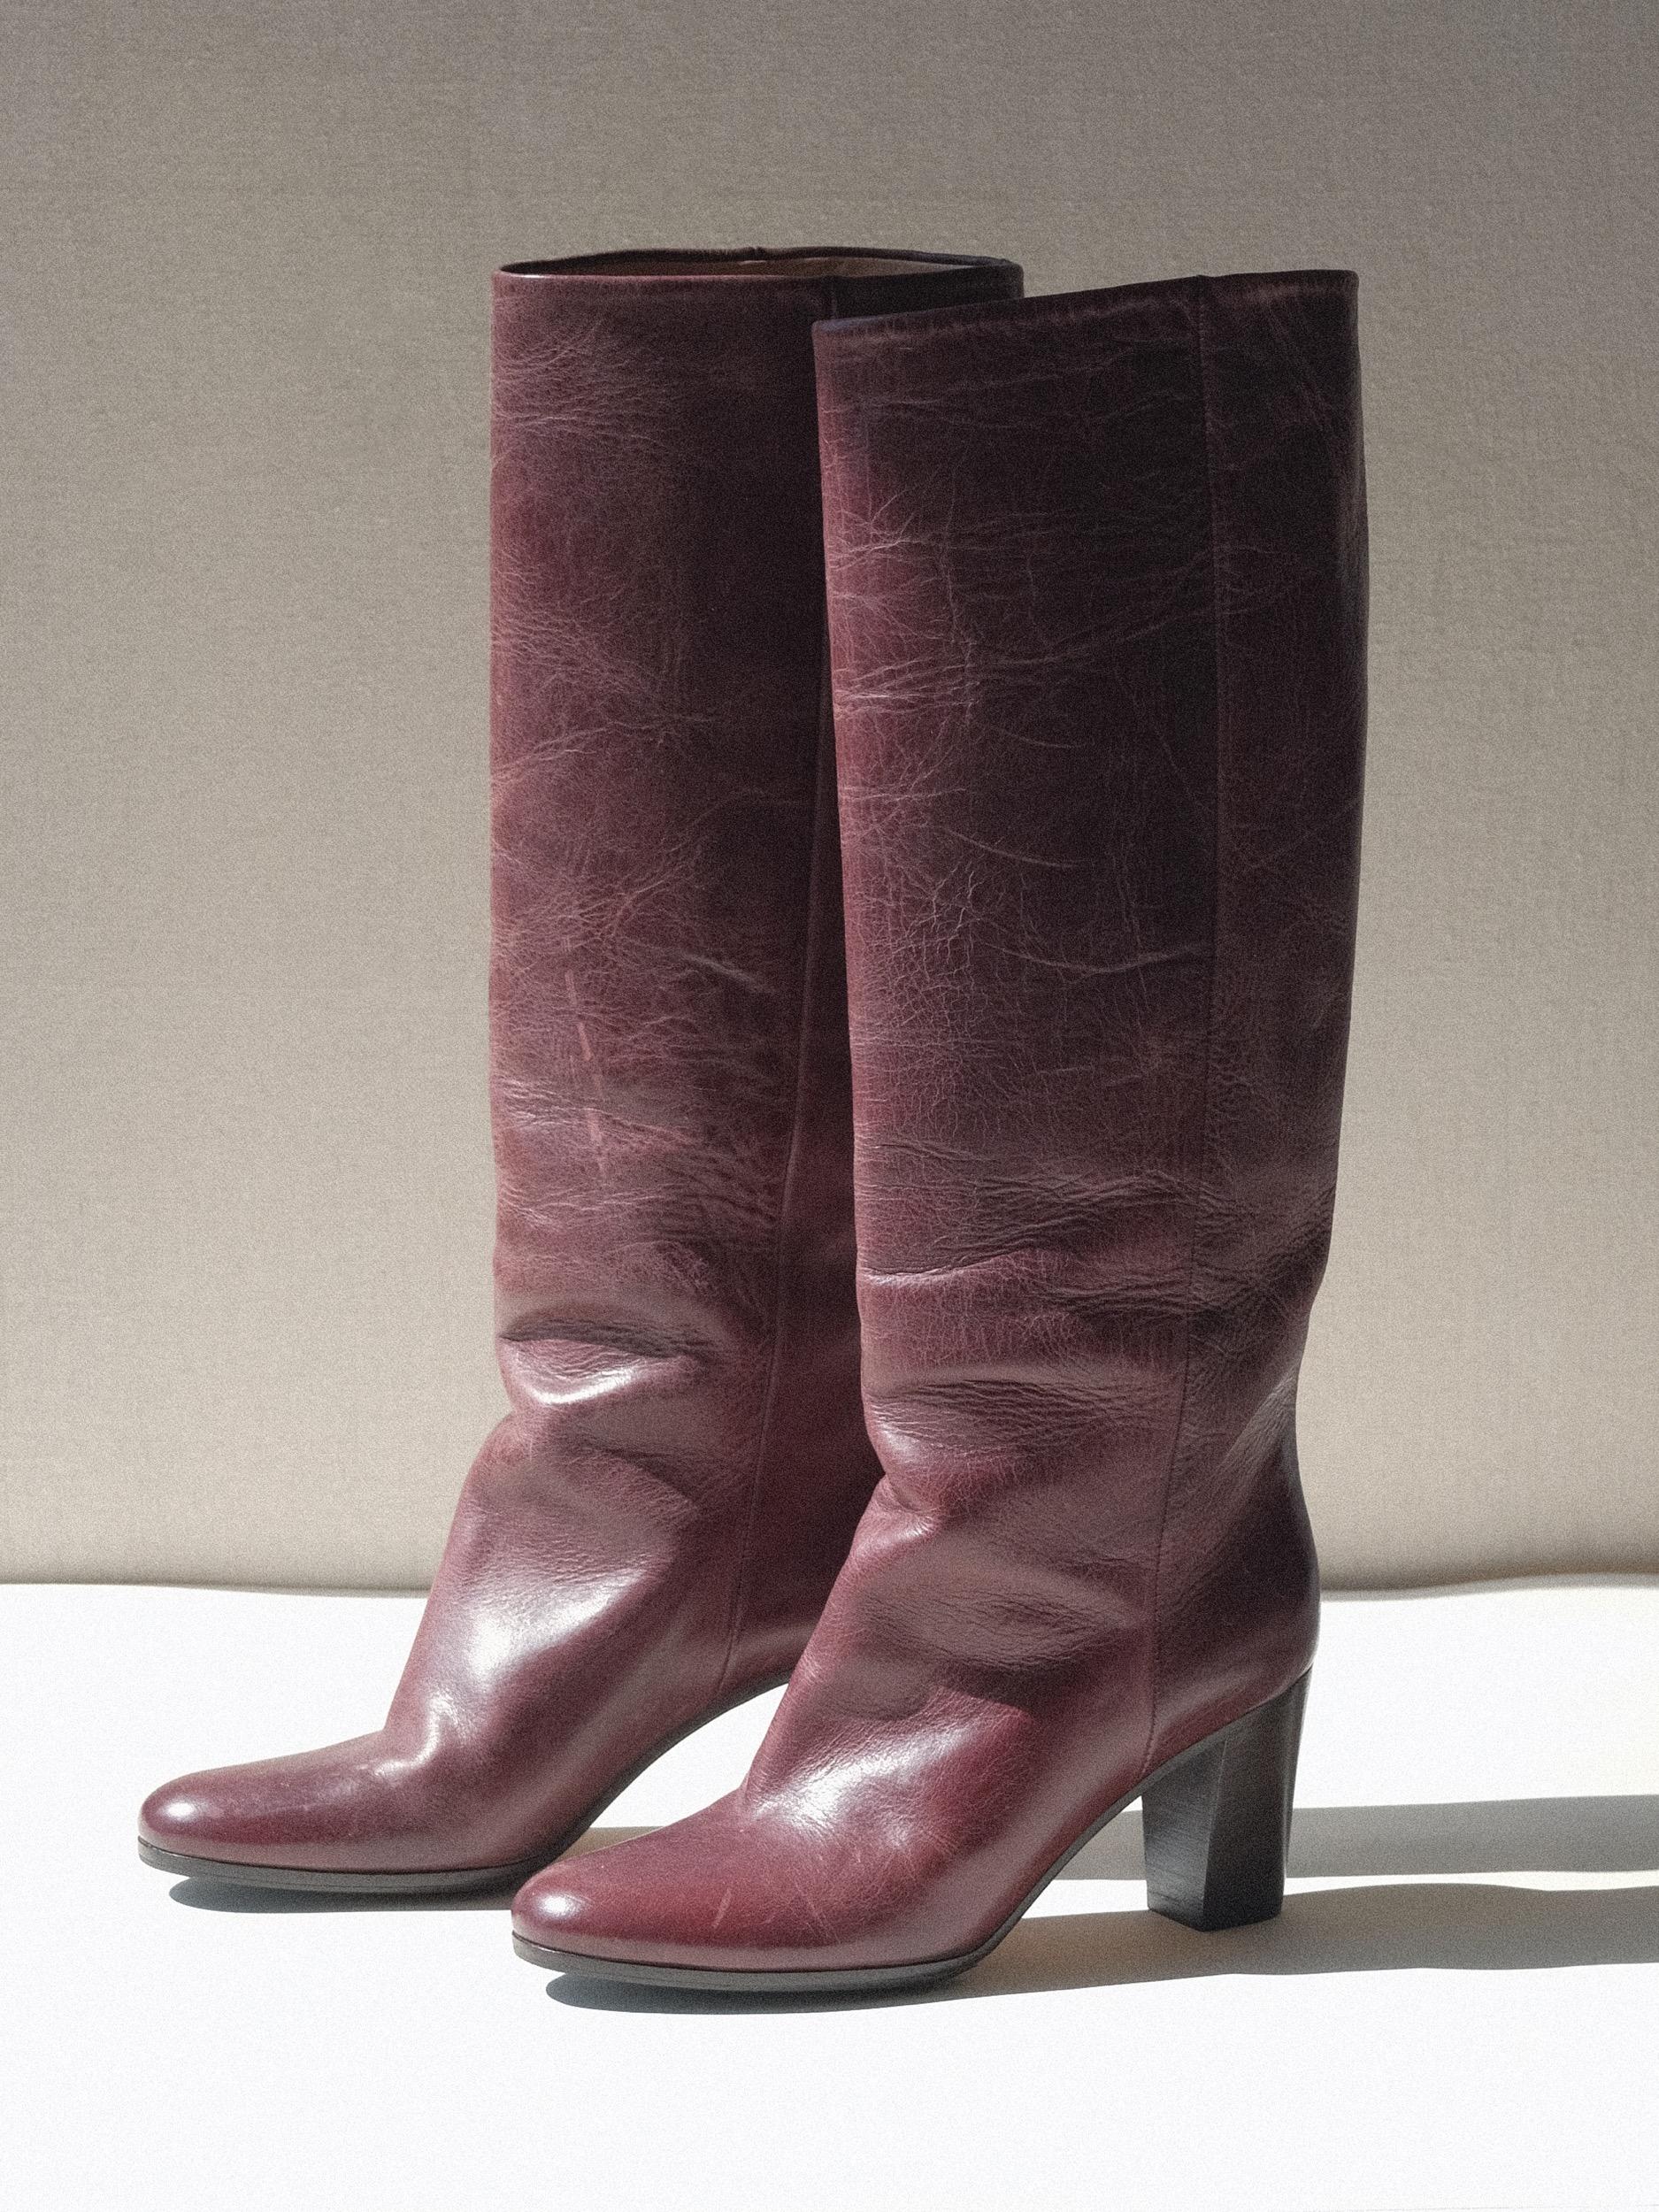 Martin Margiela Riding Boots Deep Red Size 37 Replica Line 22 In Good Condition For Sale In Los Angeles, CA